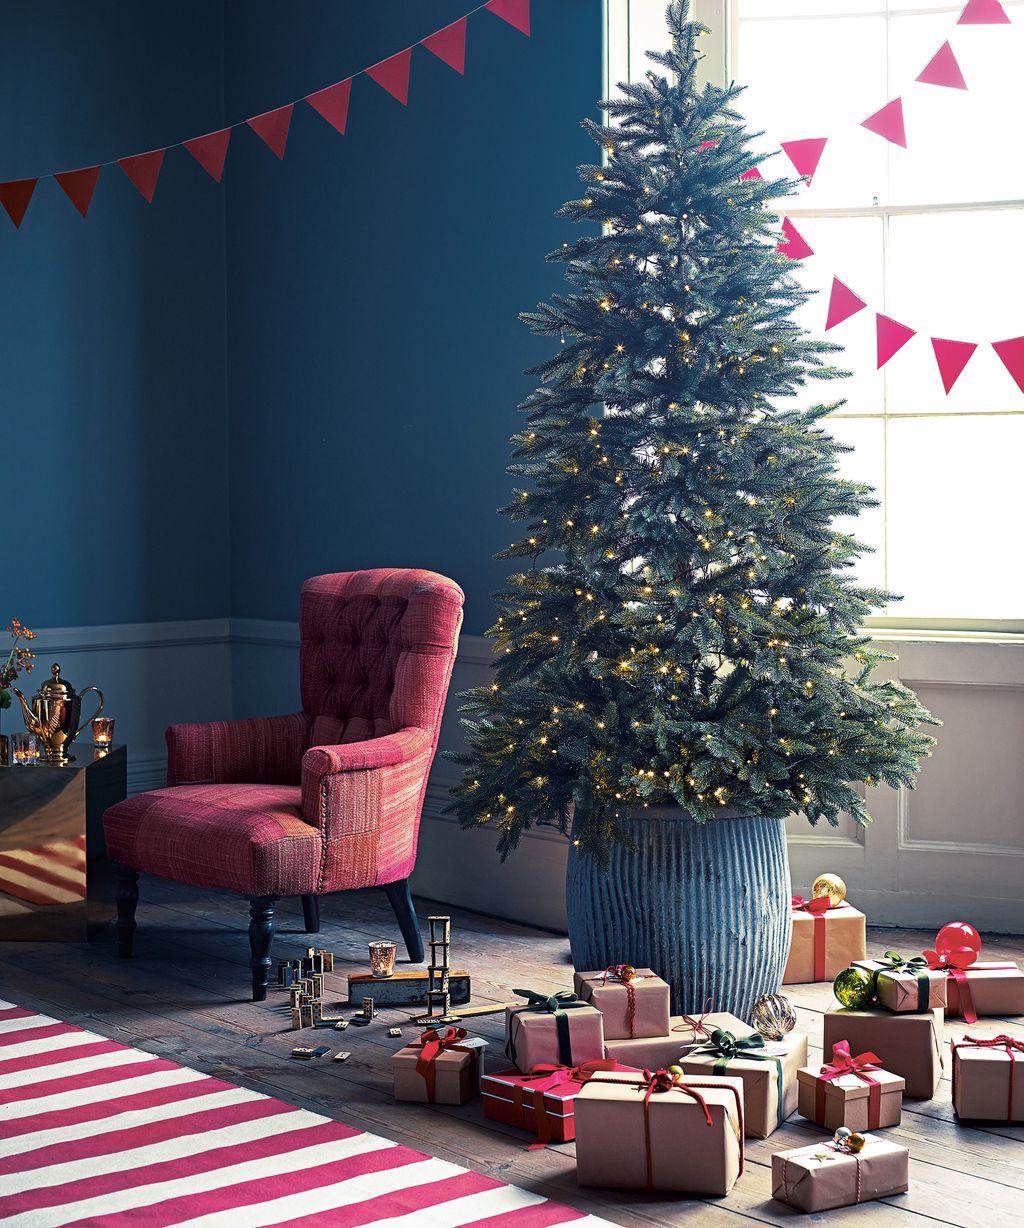 Cyber Monday Christmas tree deals – check out the best trees at the